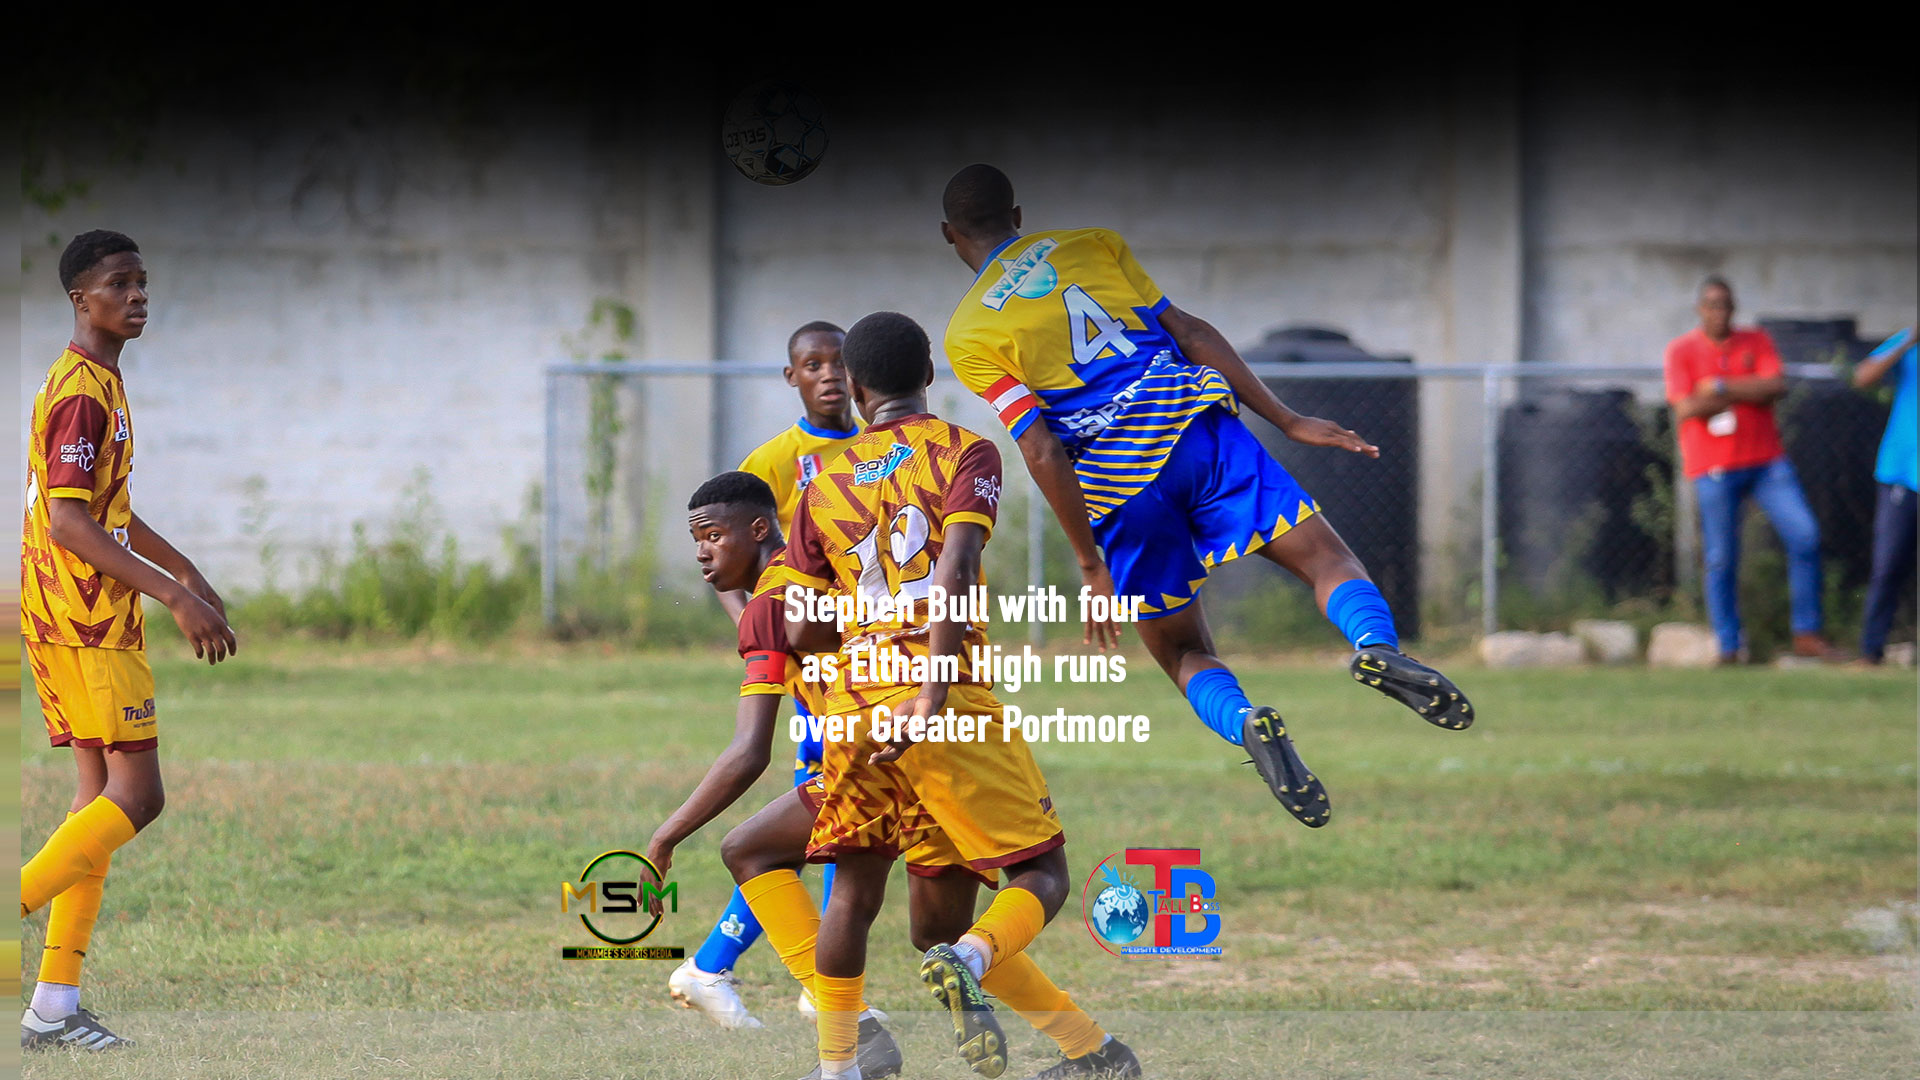 Eltham win 12-0 over Greater Portmore